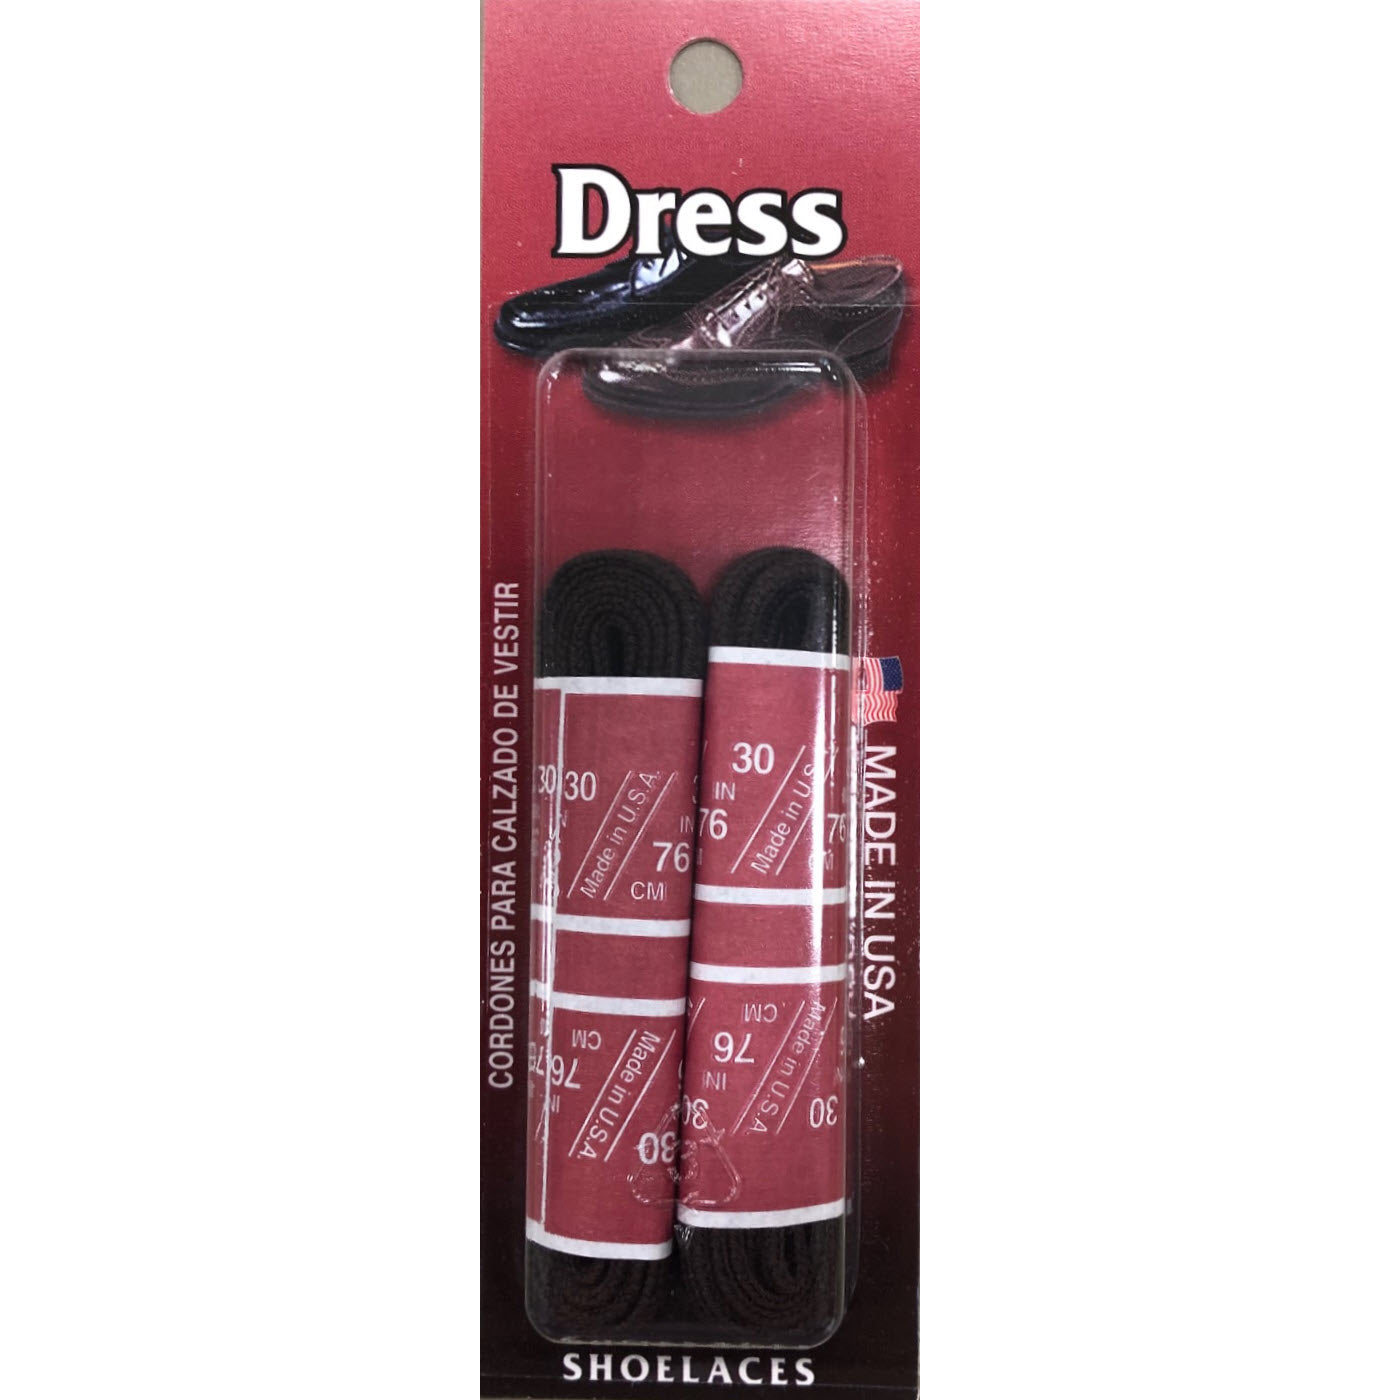 Two pairs of FRANKFORD LEATHER 30 IN ROUND DRESS BROWN shoe laces packaged on a red card labeled "dress" with shoe image, indicating 30 inches length and made in the USA by F.L. Inc.